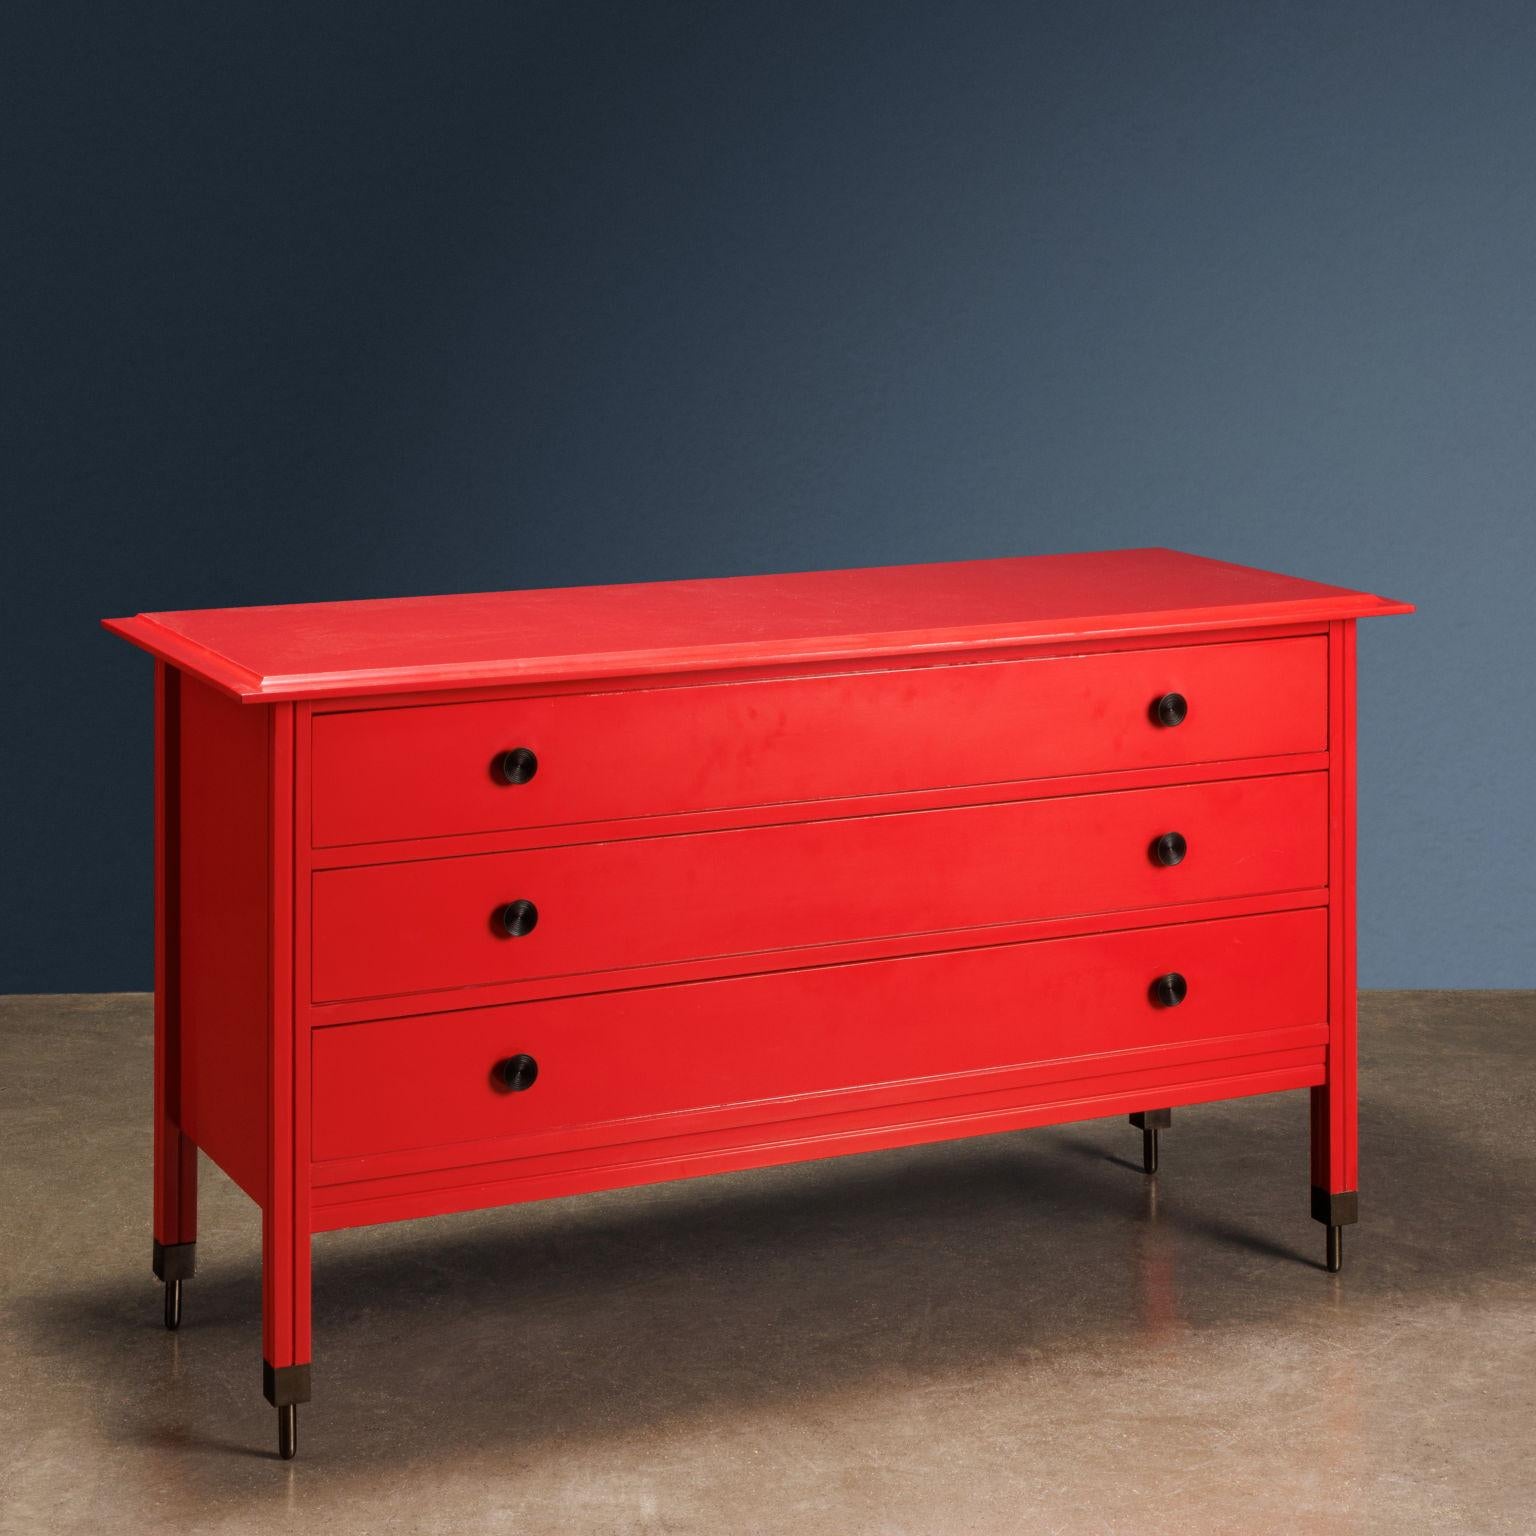 Red lacquered wooden chest of drawers model 'DC 154' with brass tips and handles; designed by Carlo de Carli and produced by Sormani from 1963-64.